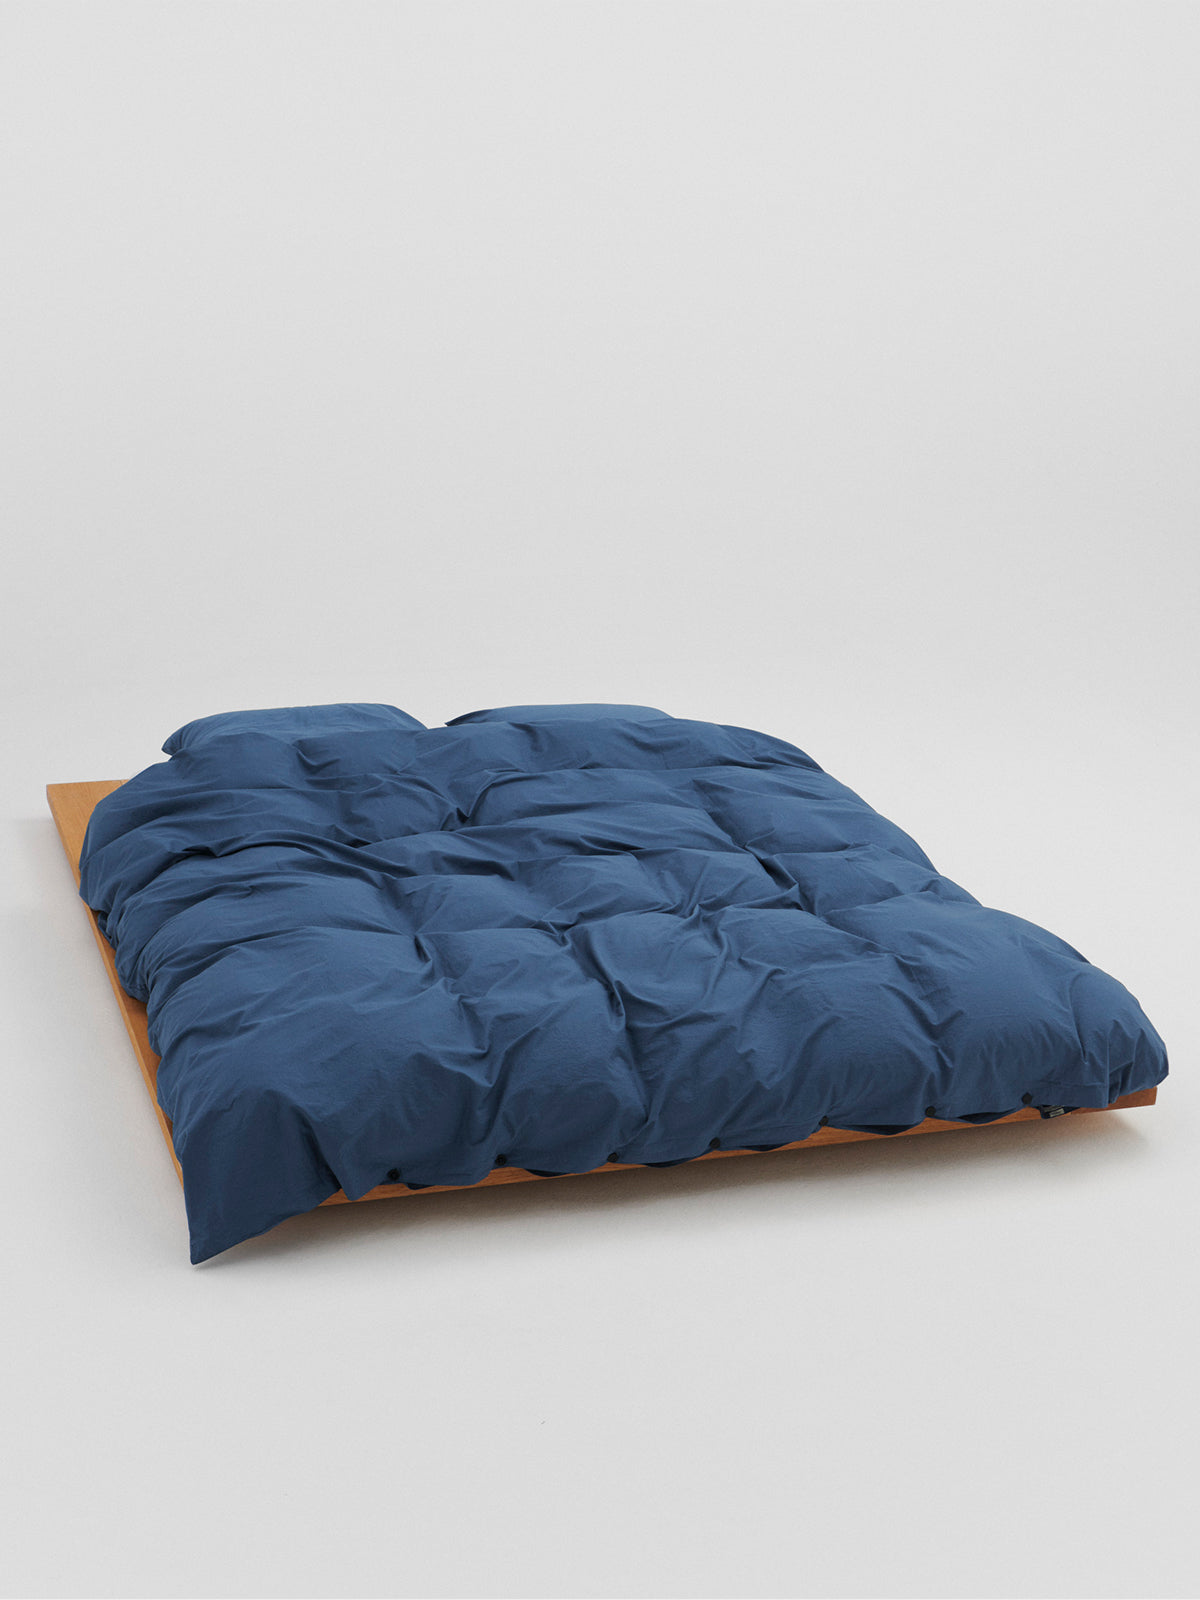 Tekla - Percale Duvet Cover in Midnight Blue